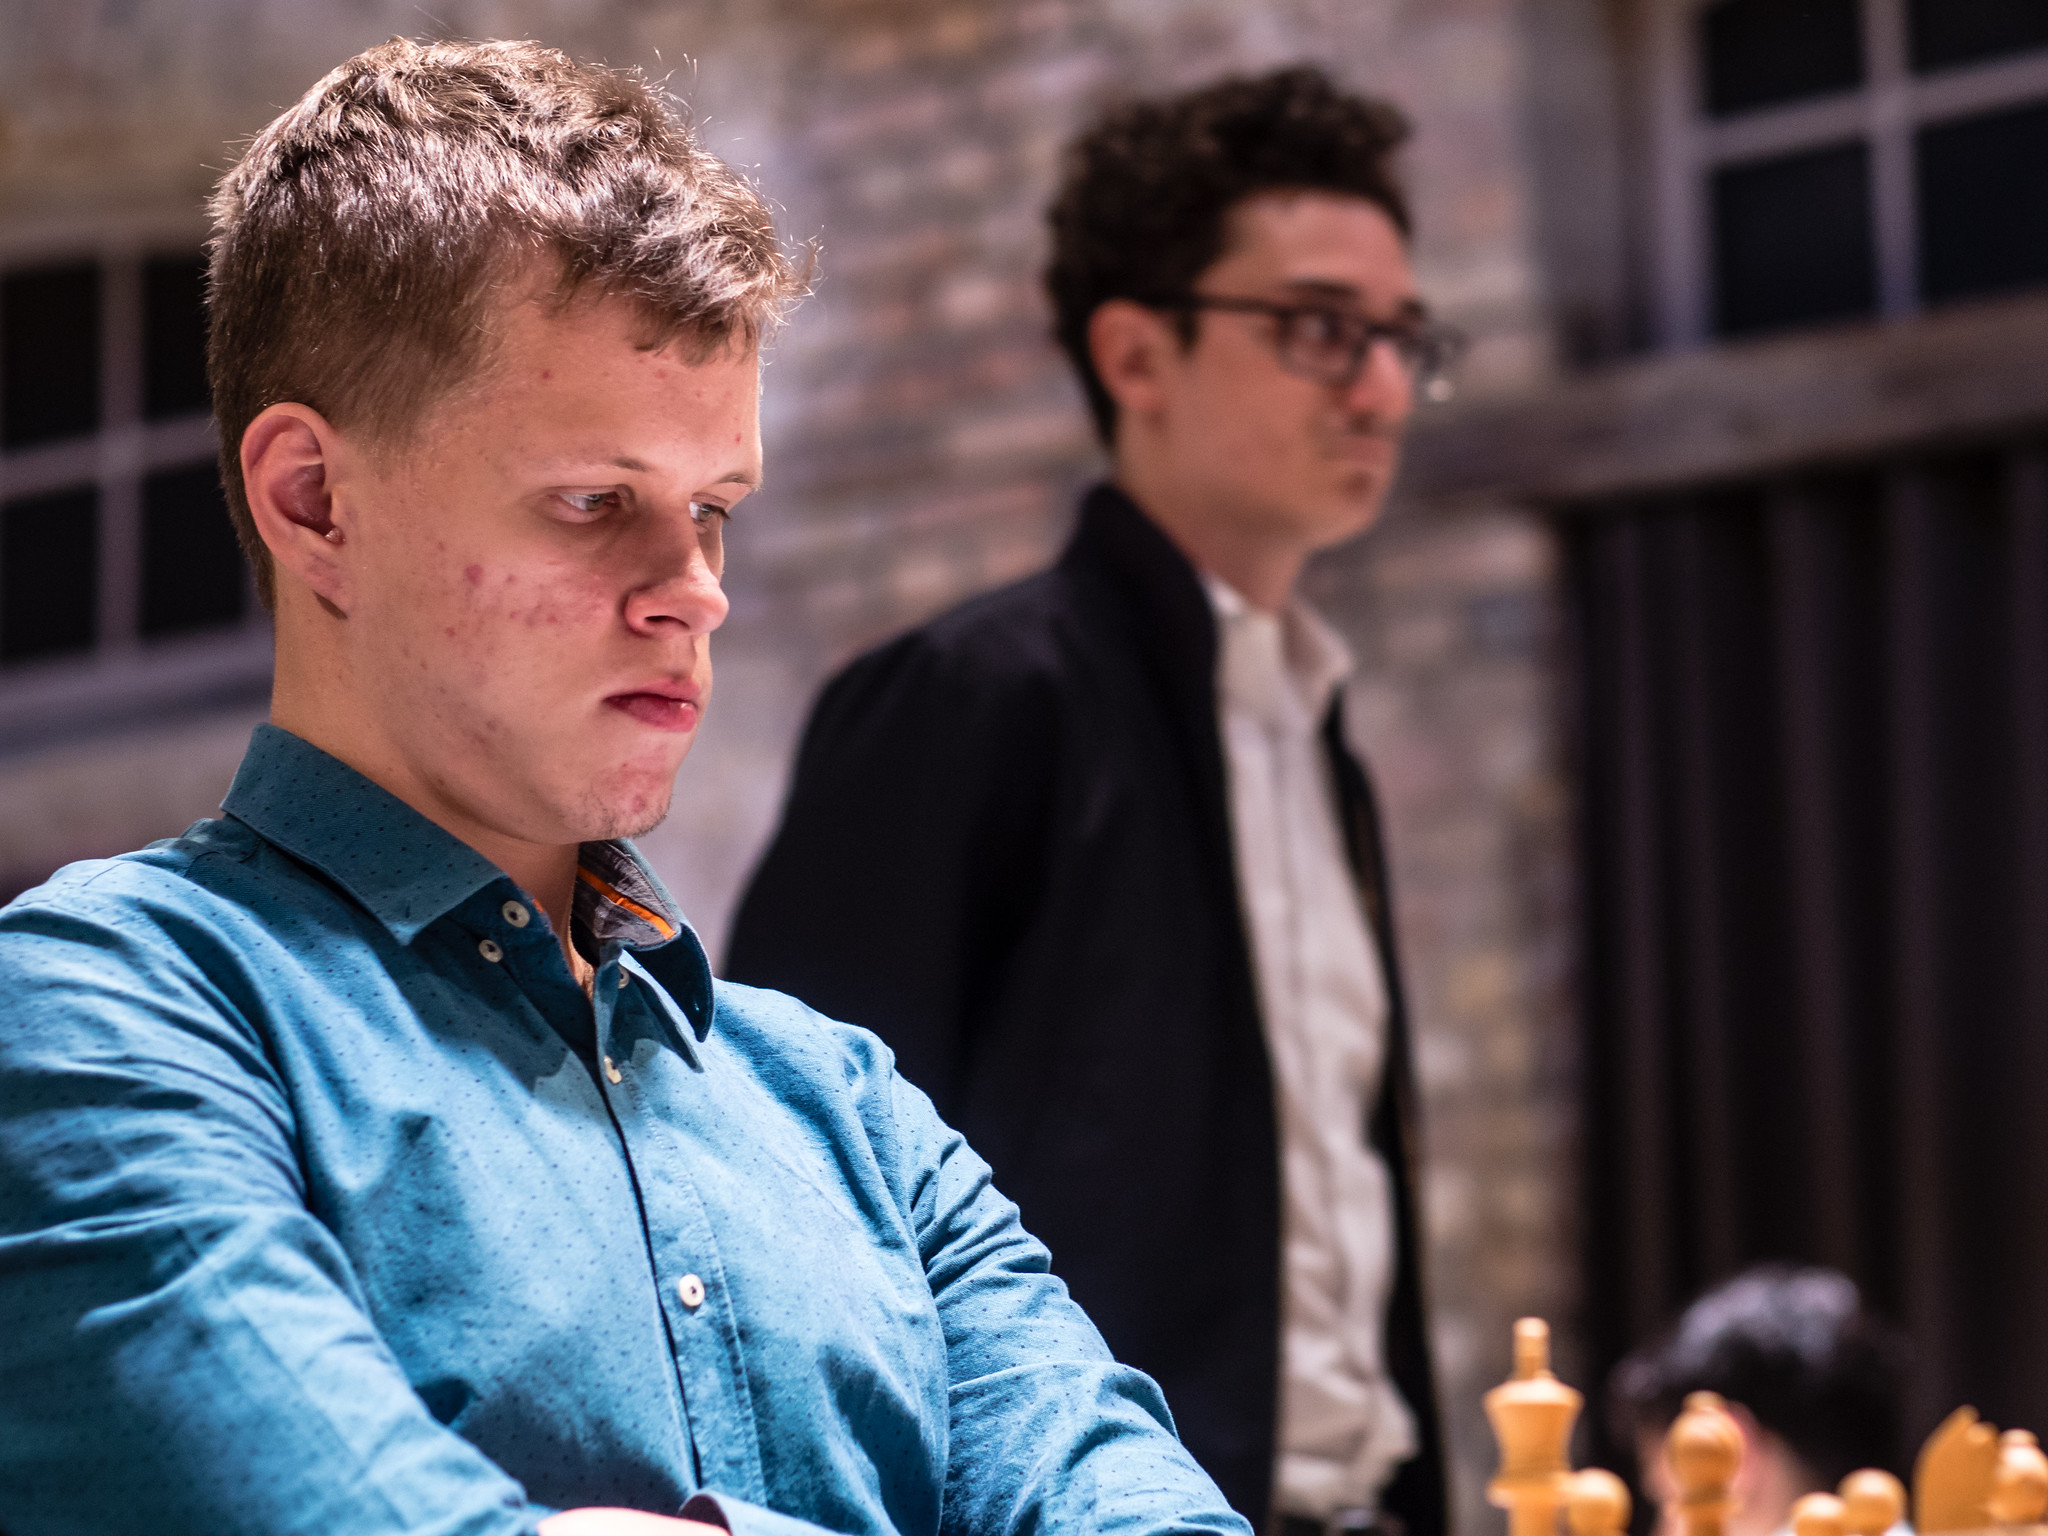 Carlsen falls to Artemiev, Chessable Masters Day 1